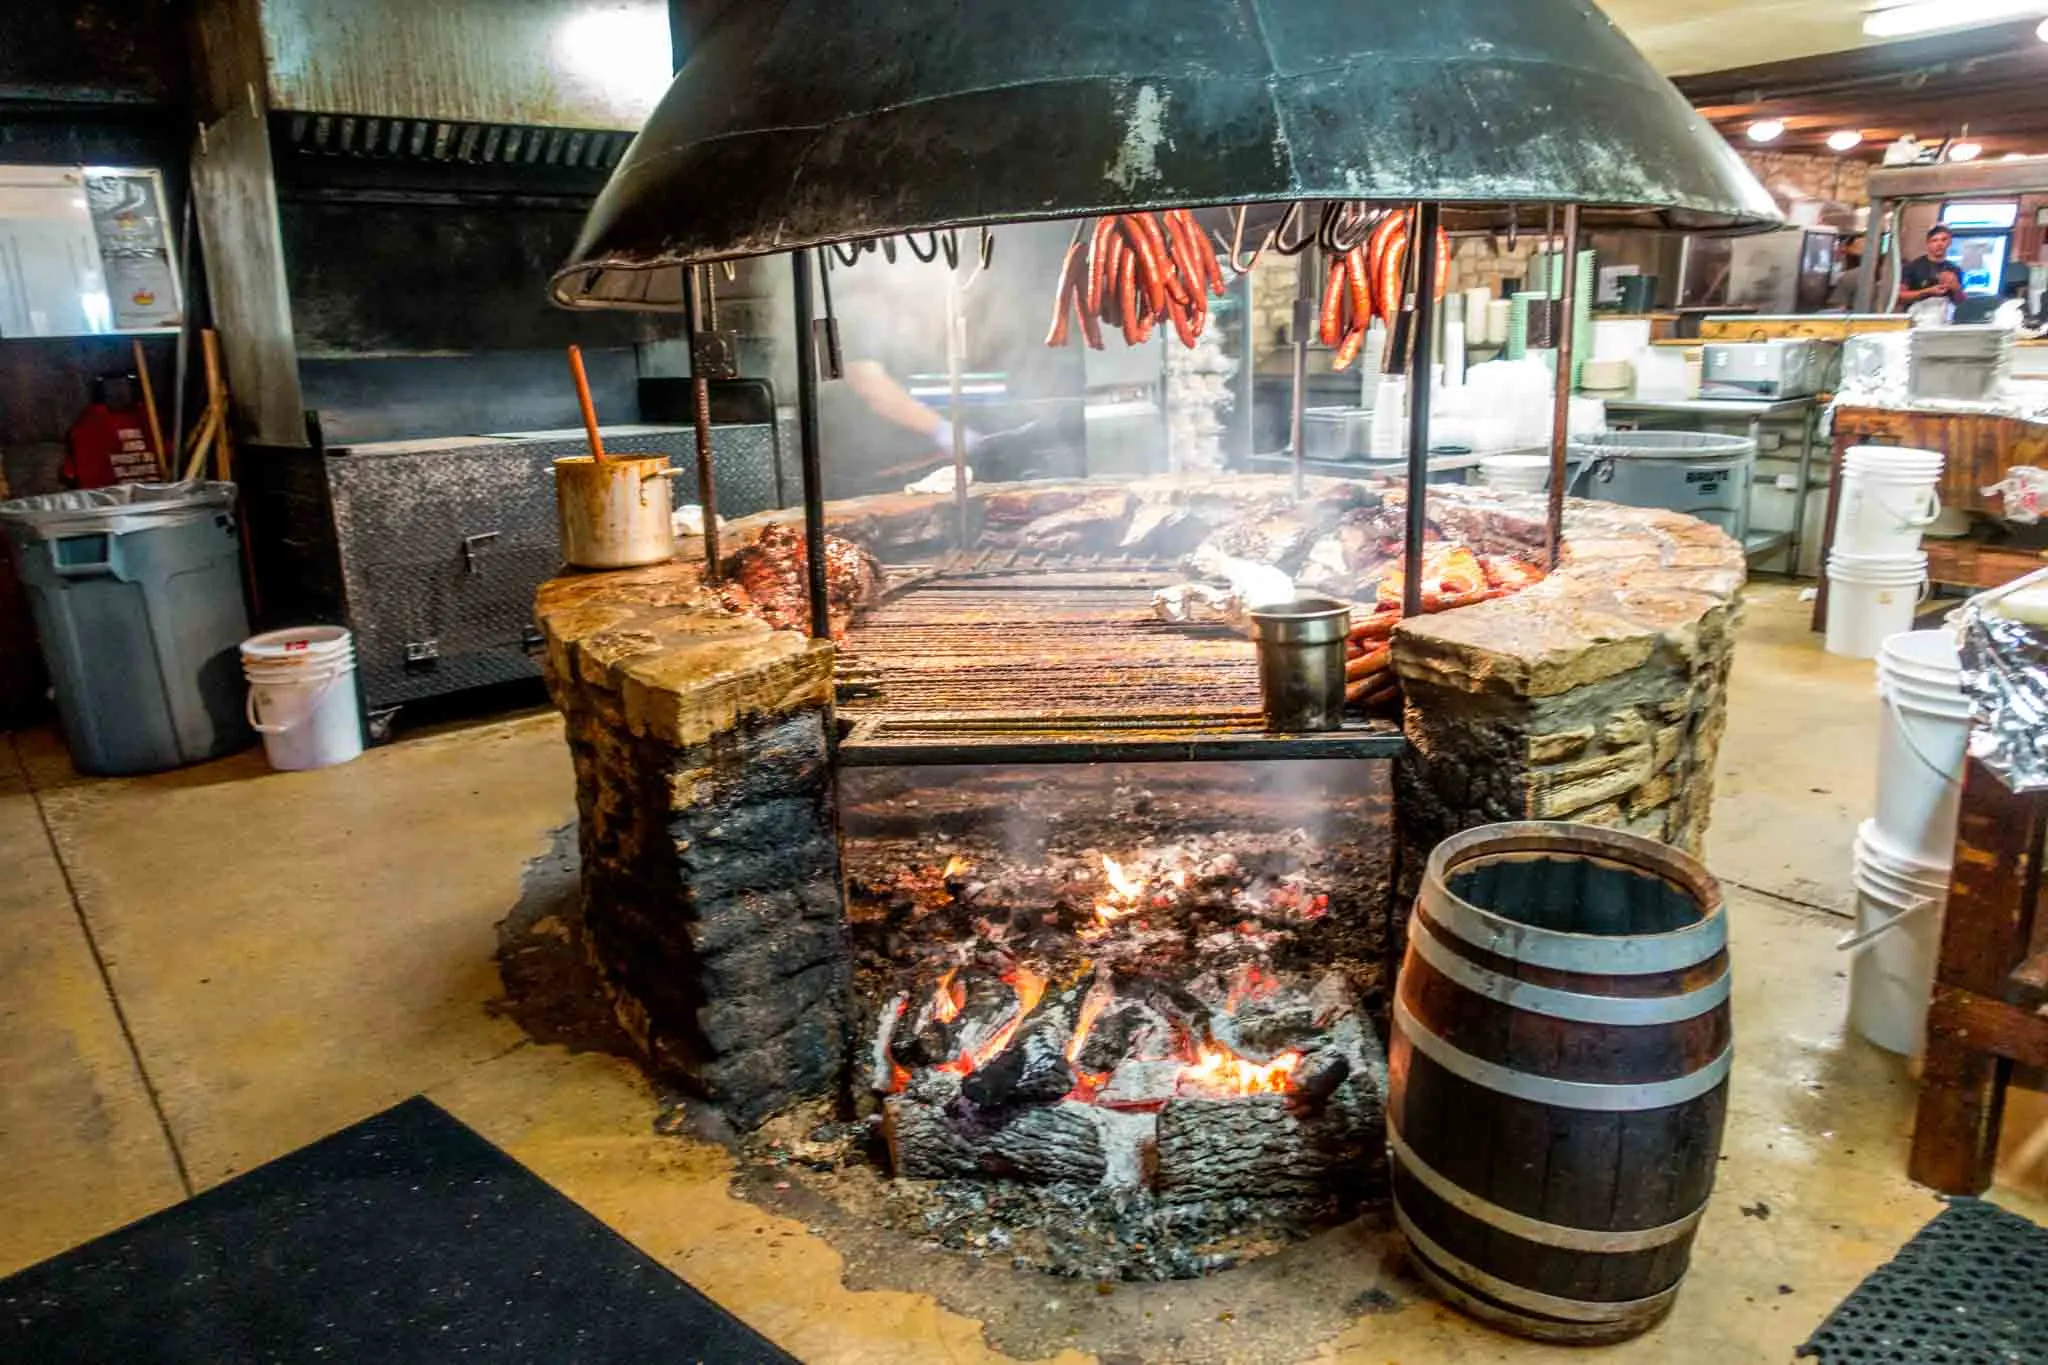 Sausage and meat cooking over open fire at The Salt Lick